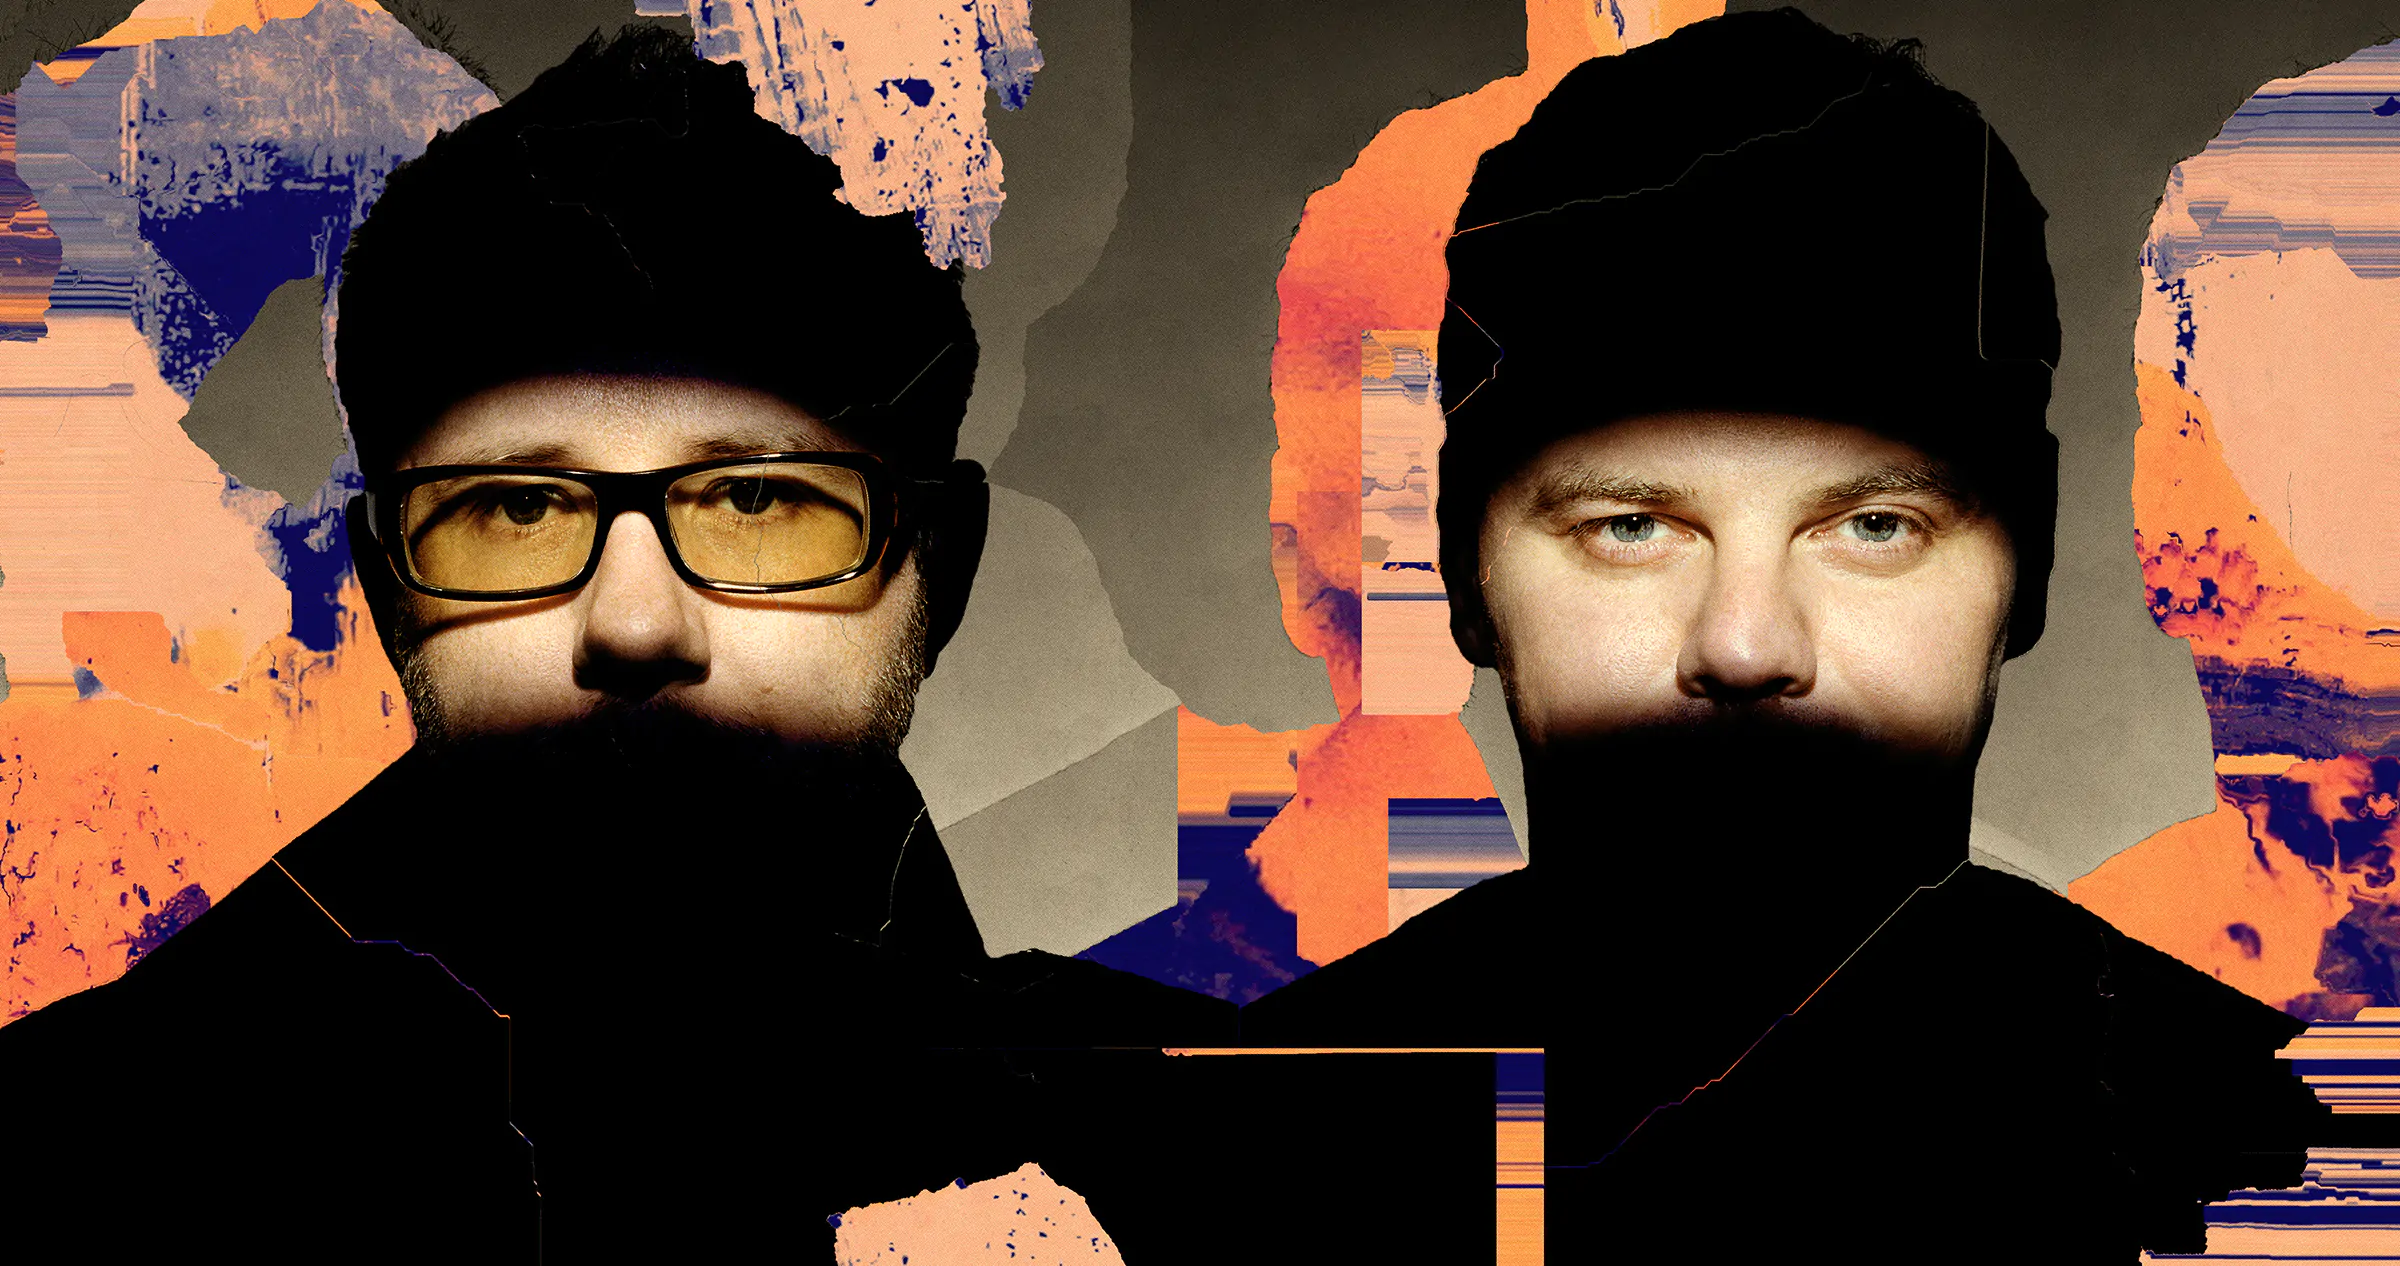 THE CHEMICAL BROTHERS release video for new track ‘The Darkness That You Fear’